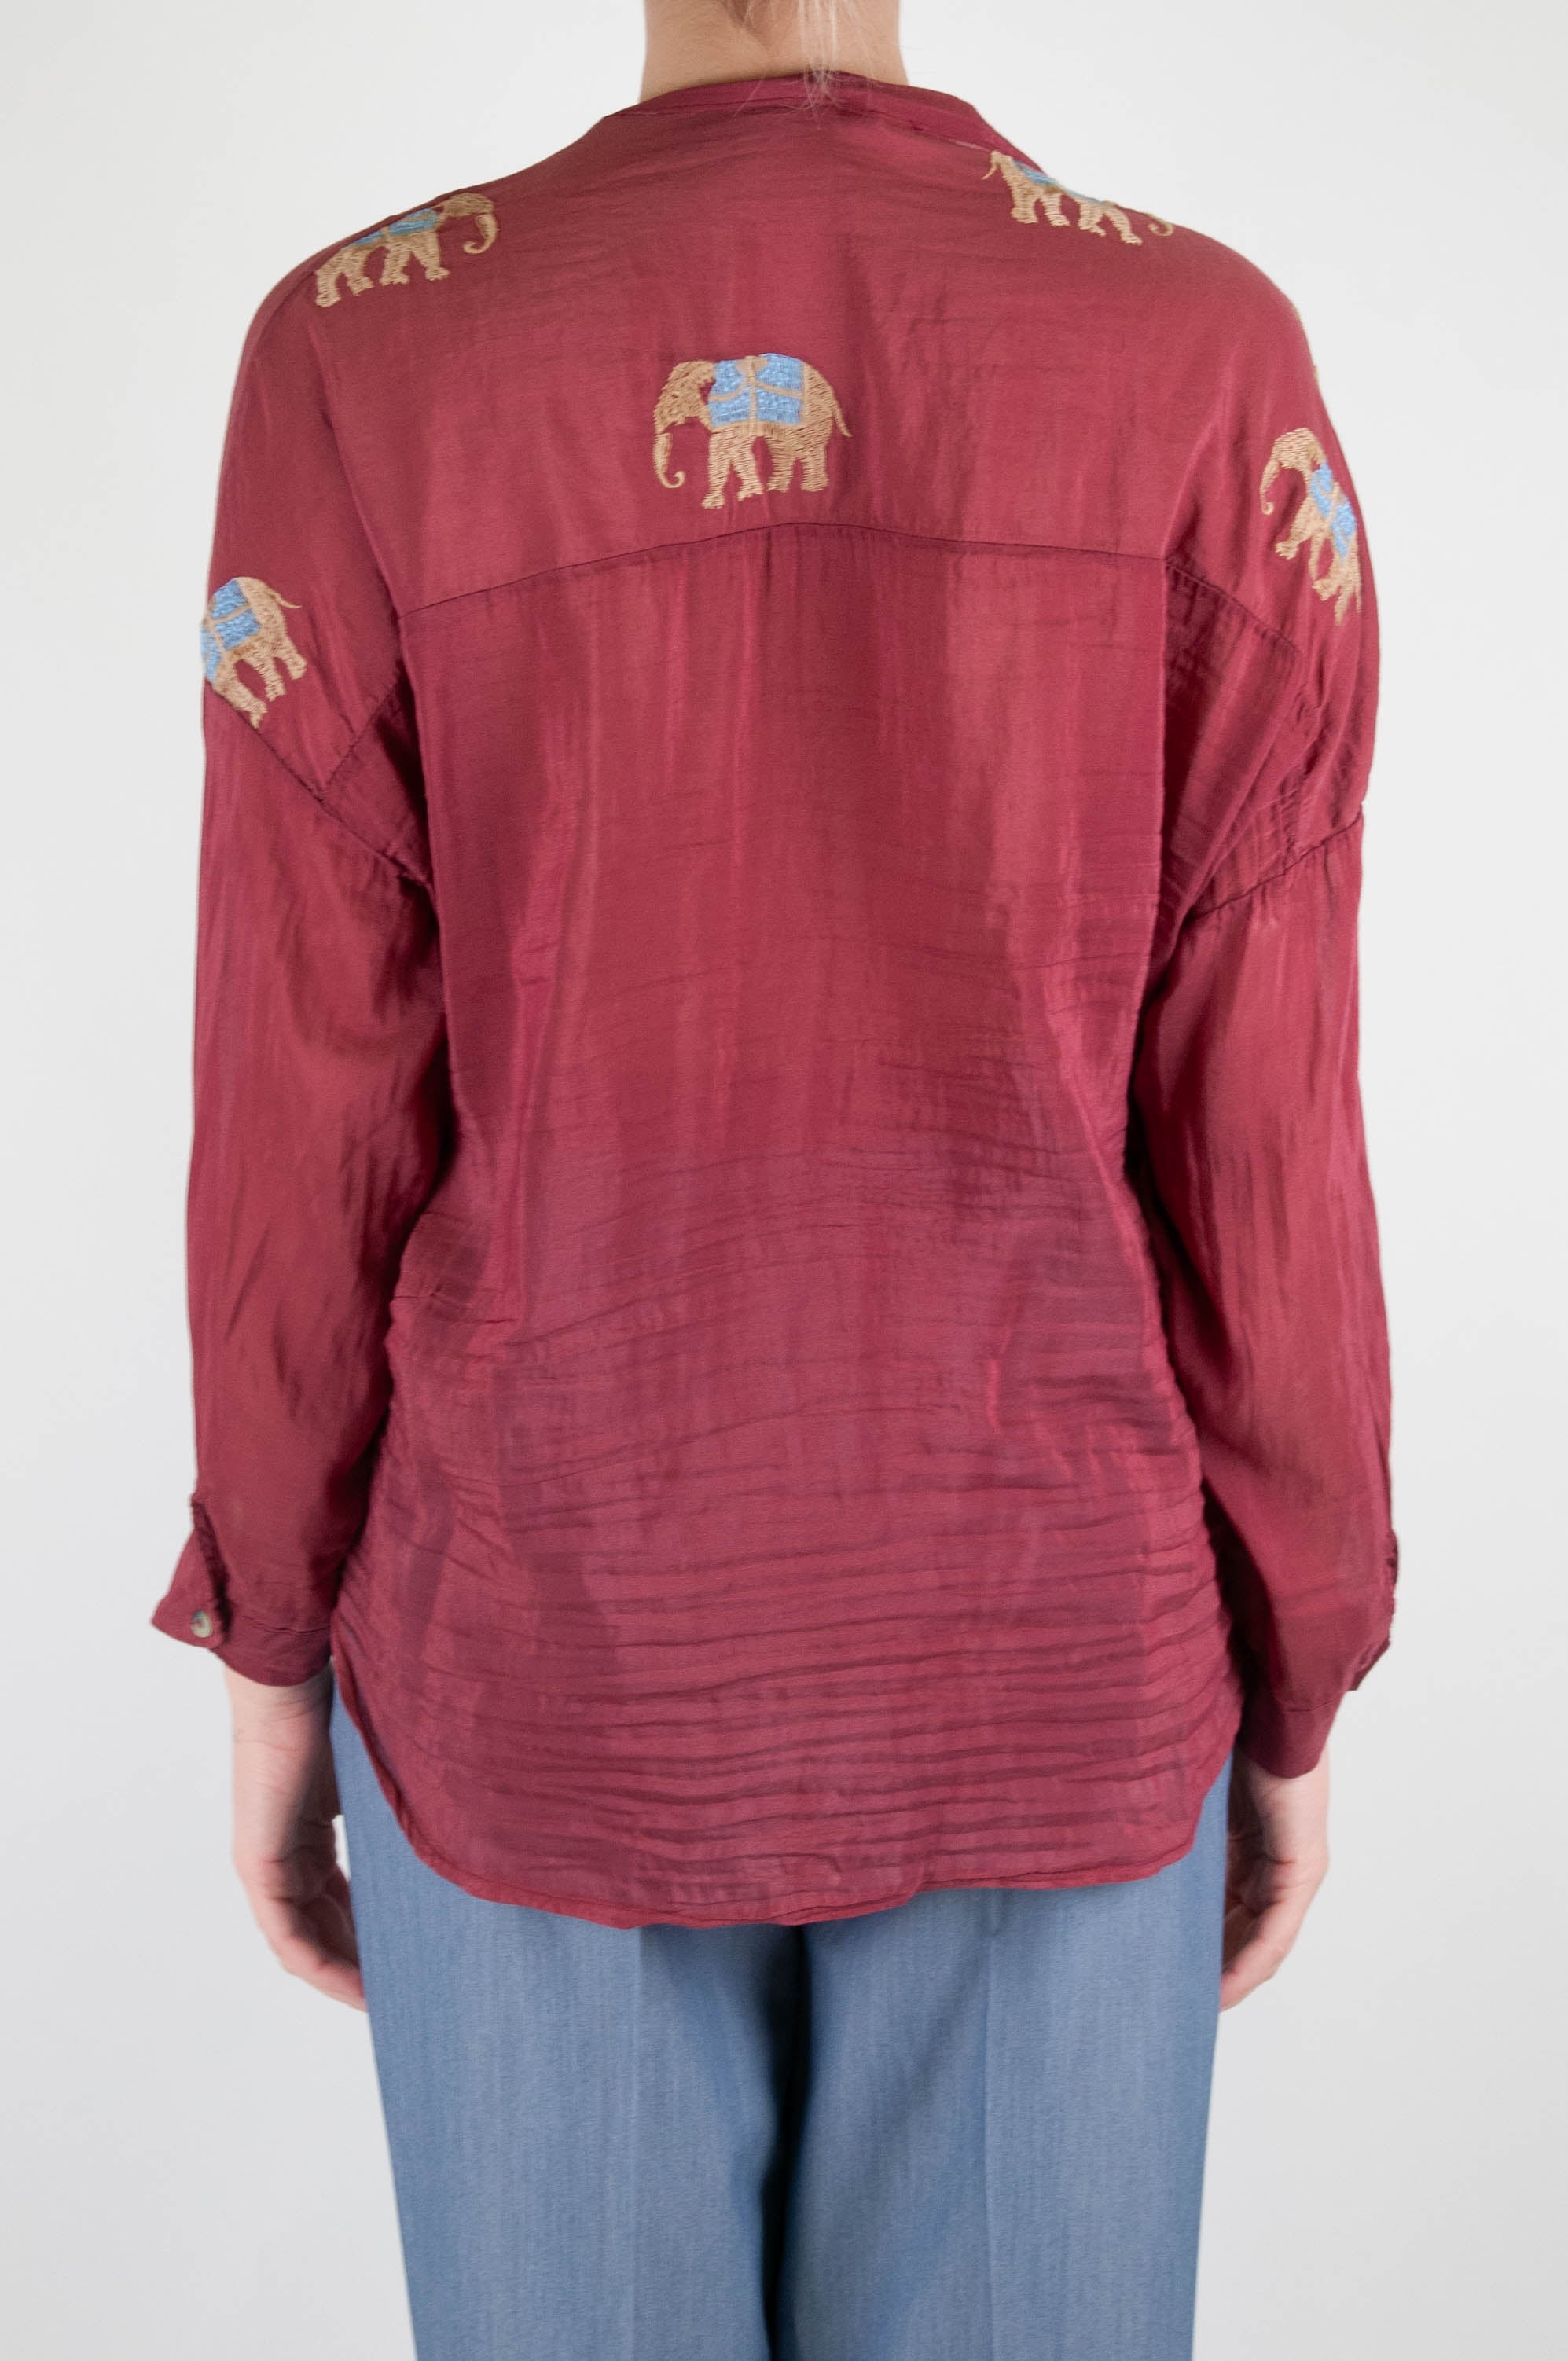 Tension in - Silk blend shirt with elephant embroidery and knot on the bottom